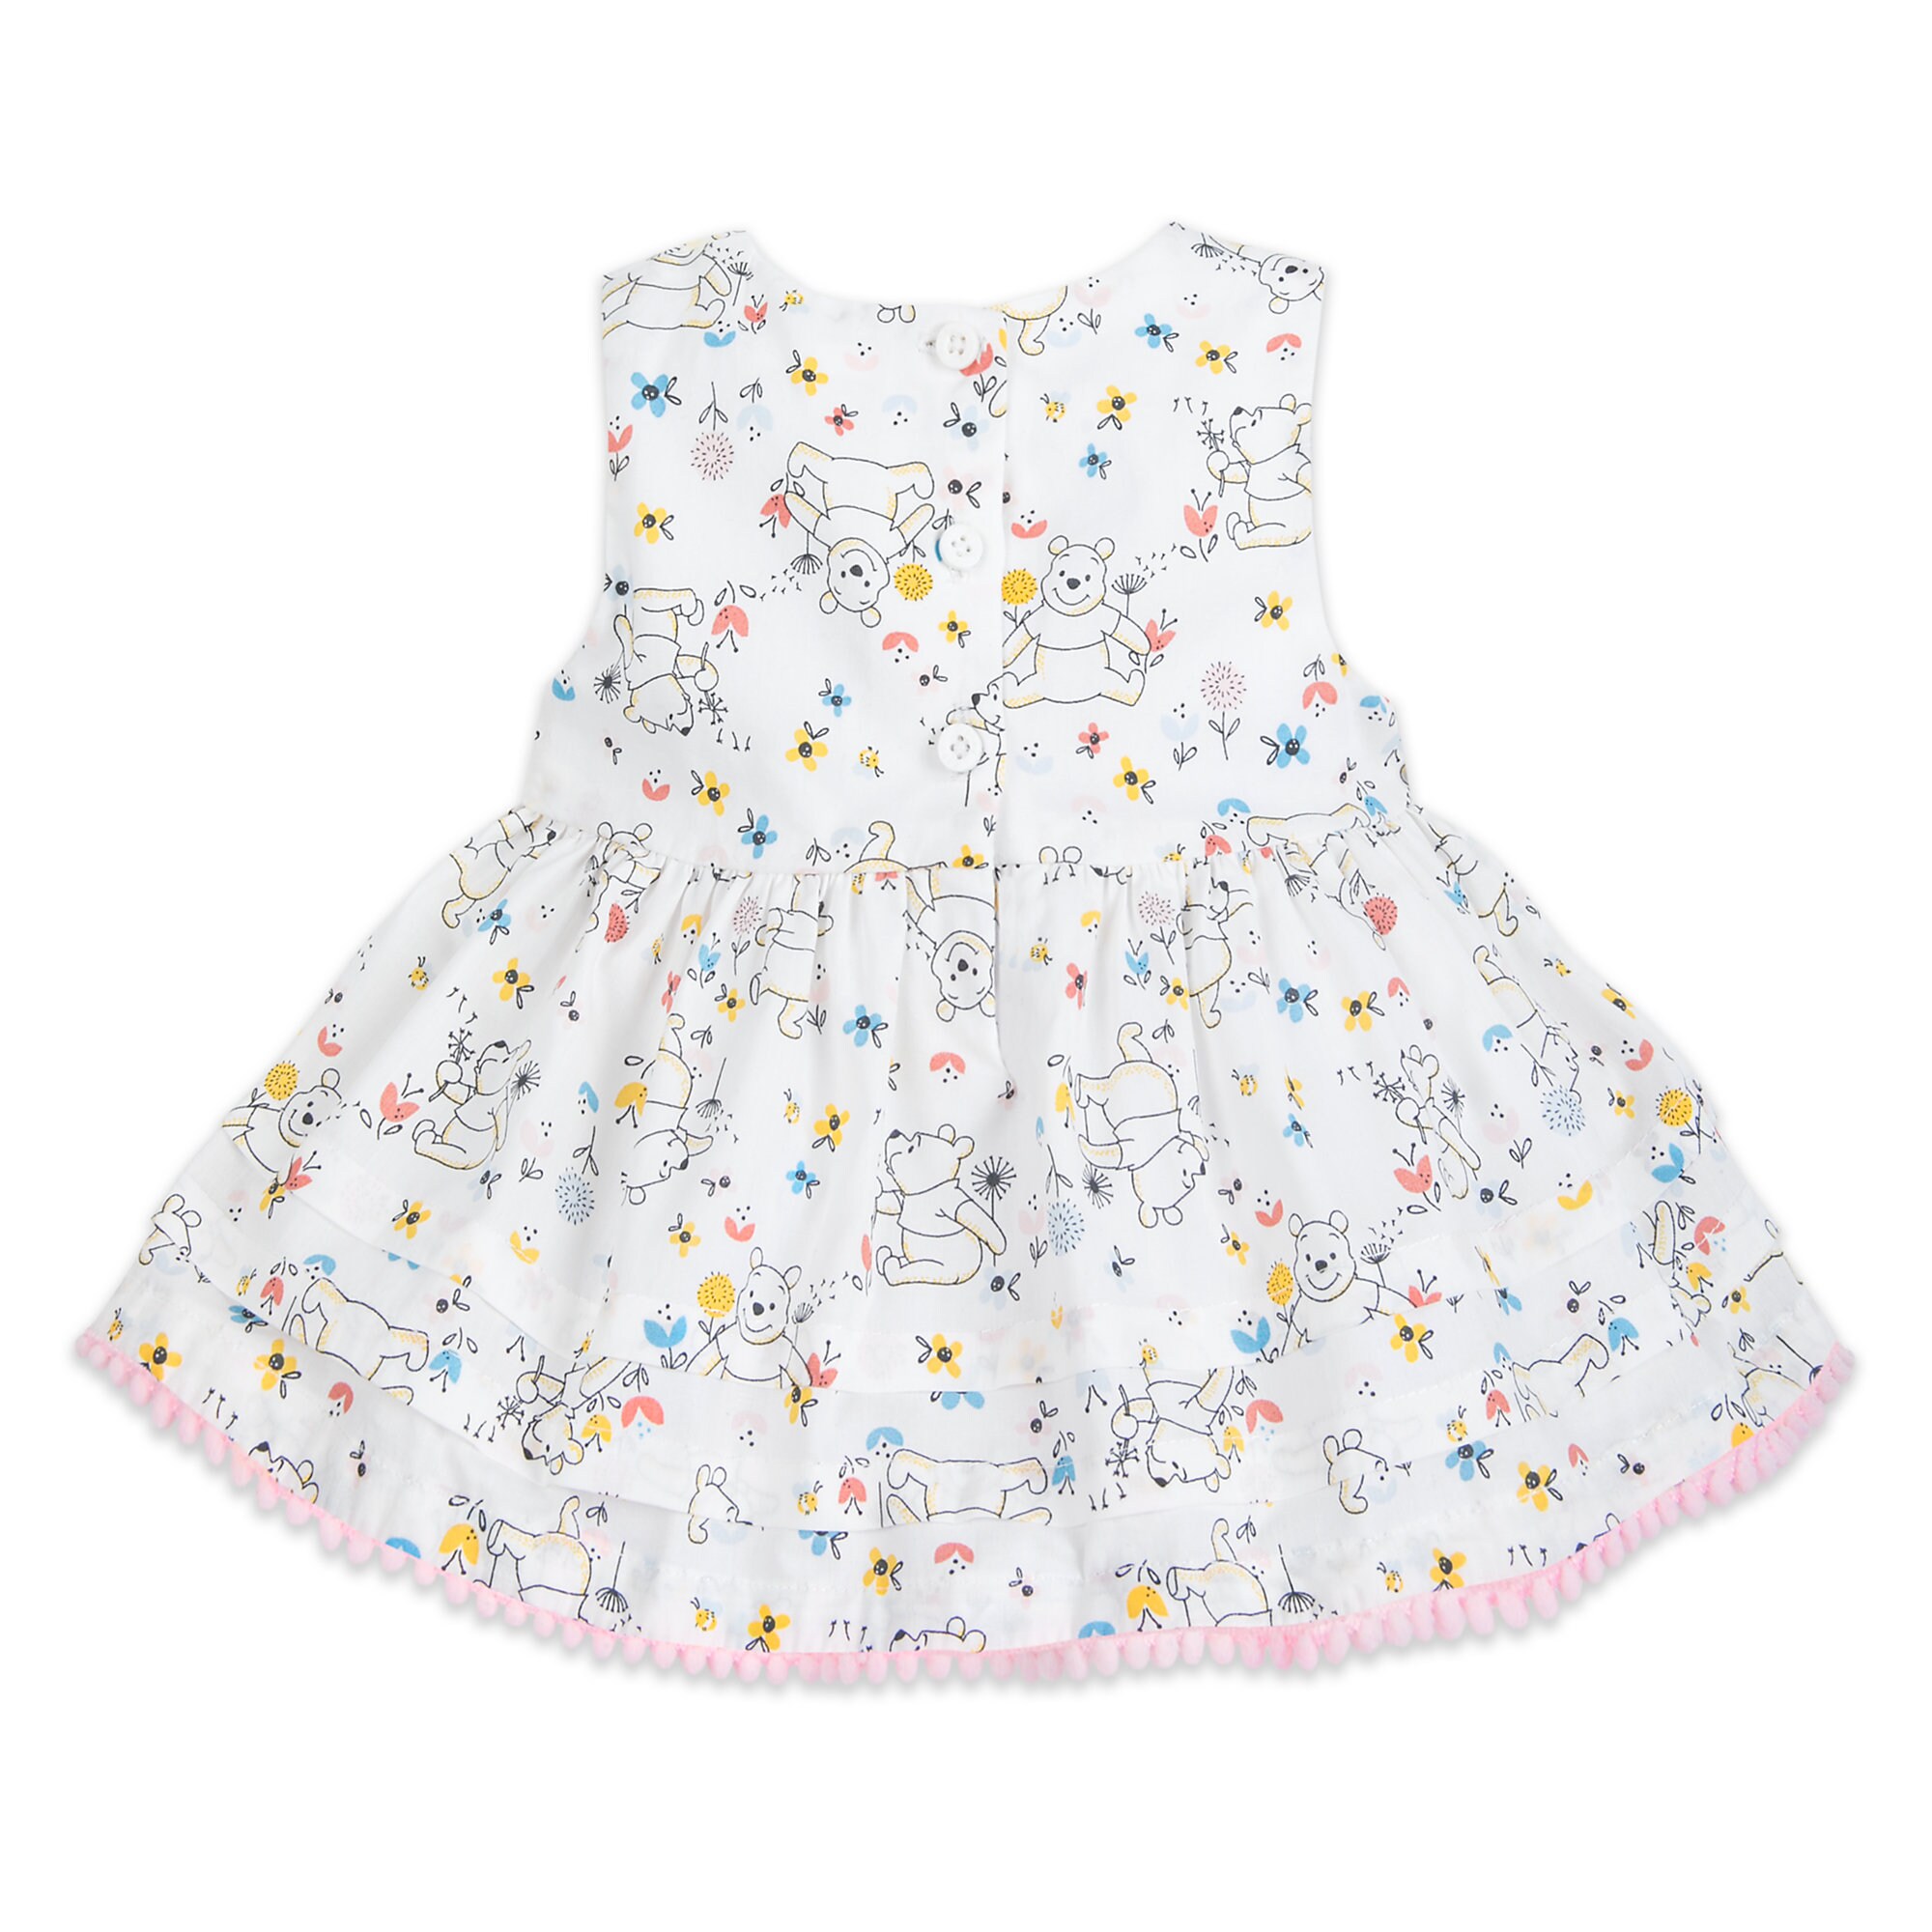 Winnie the Pooh Dress and Bloomer Set for Baby